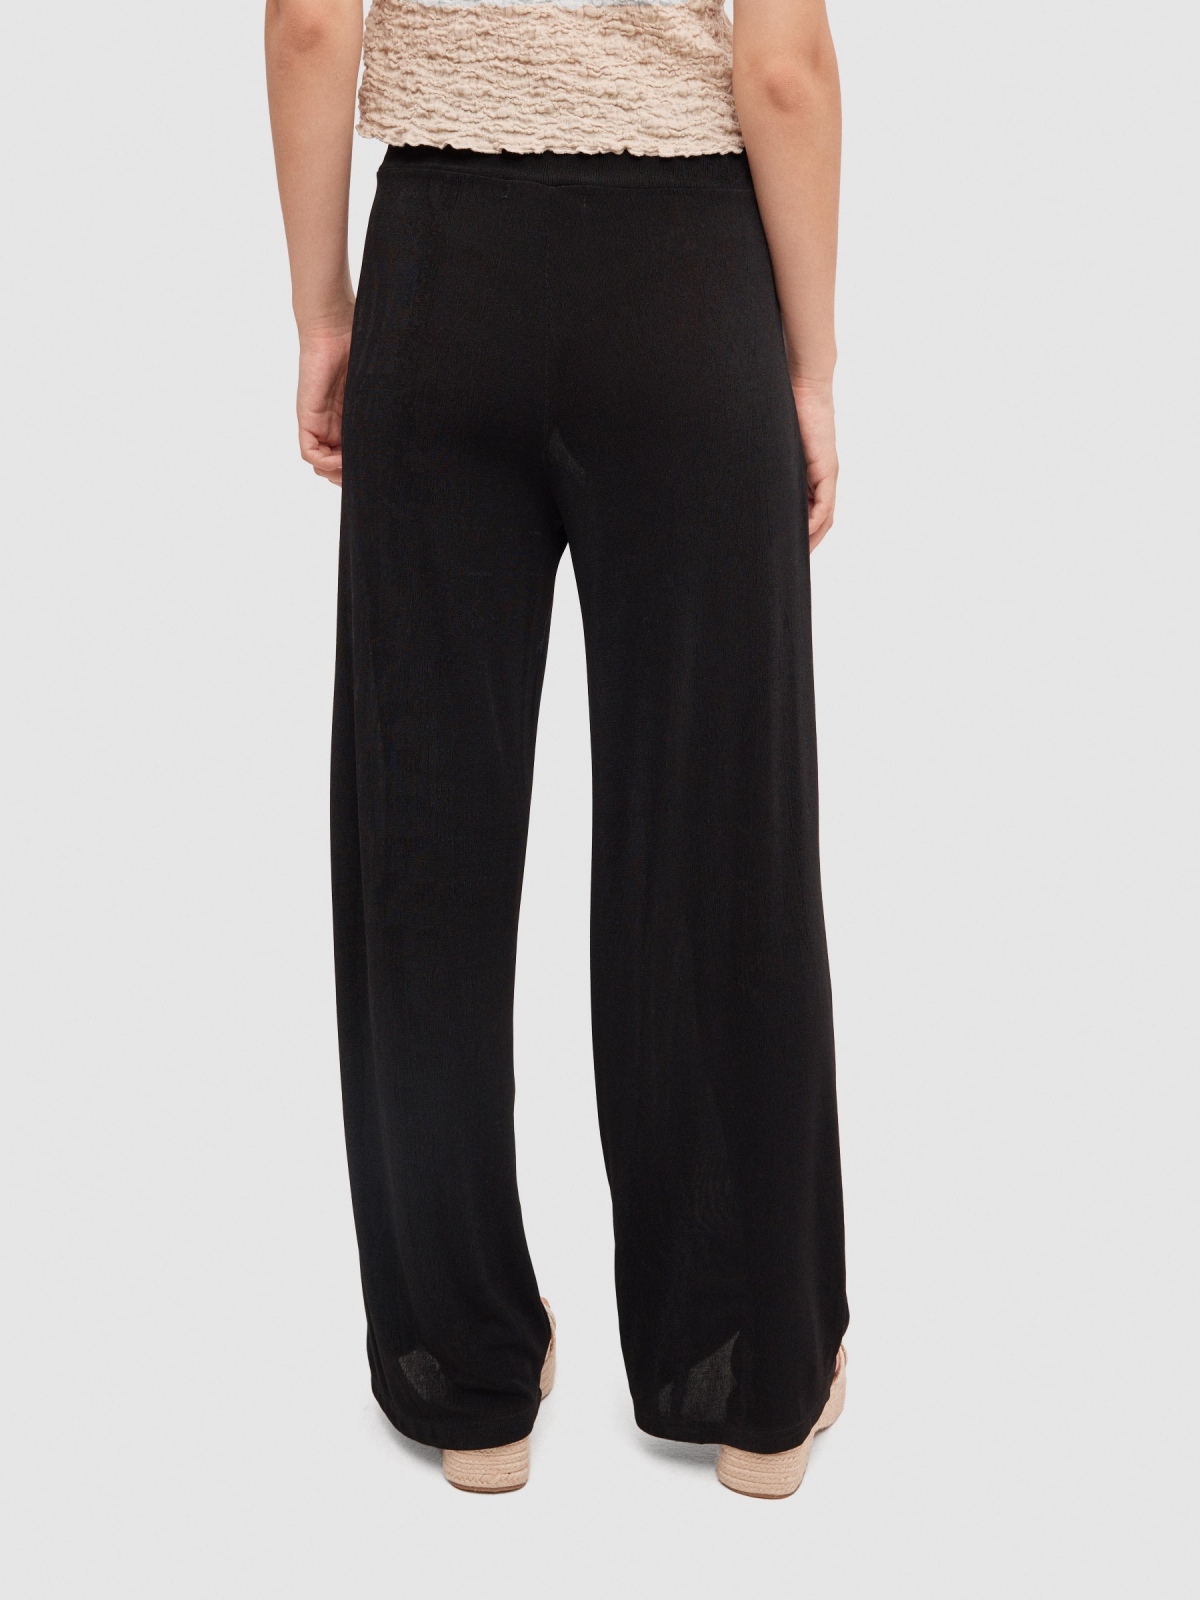 Ruched culotte trousers black detail view